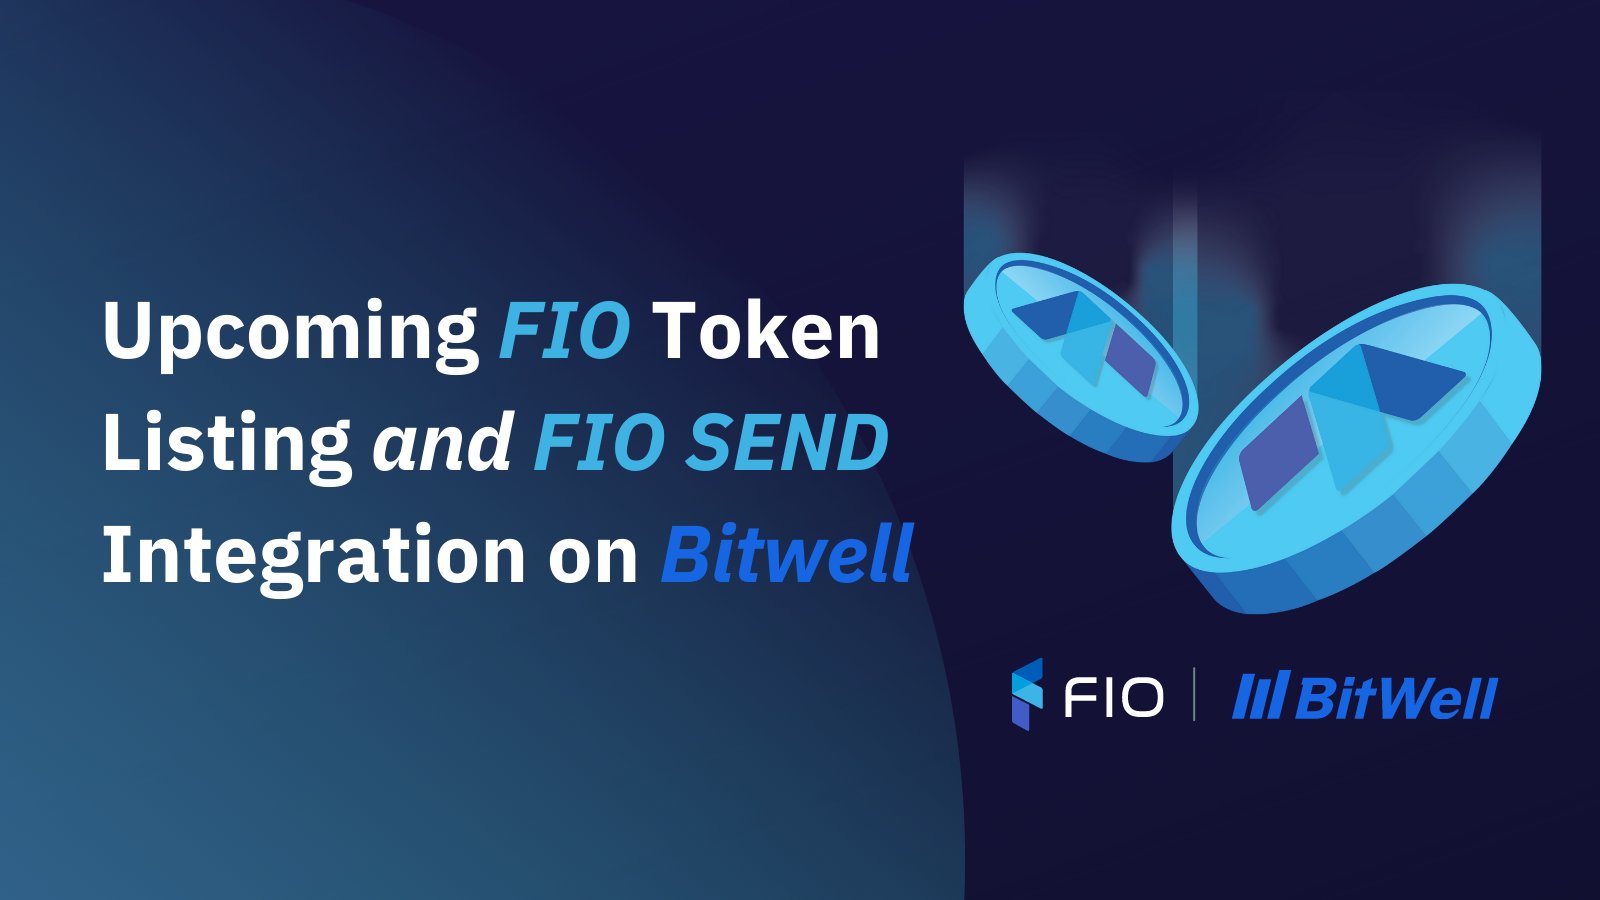 FIO Protocol on Twitter: "???? Upcoming Listing + Integration ...